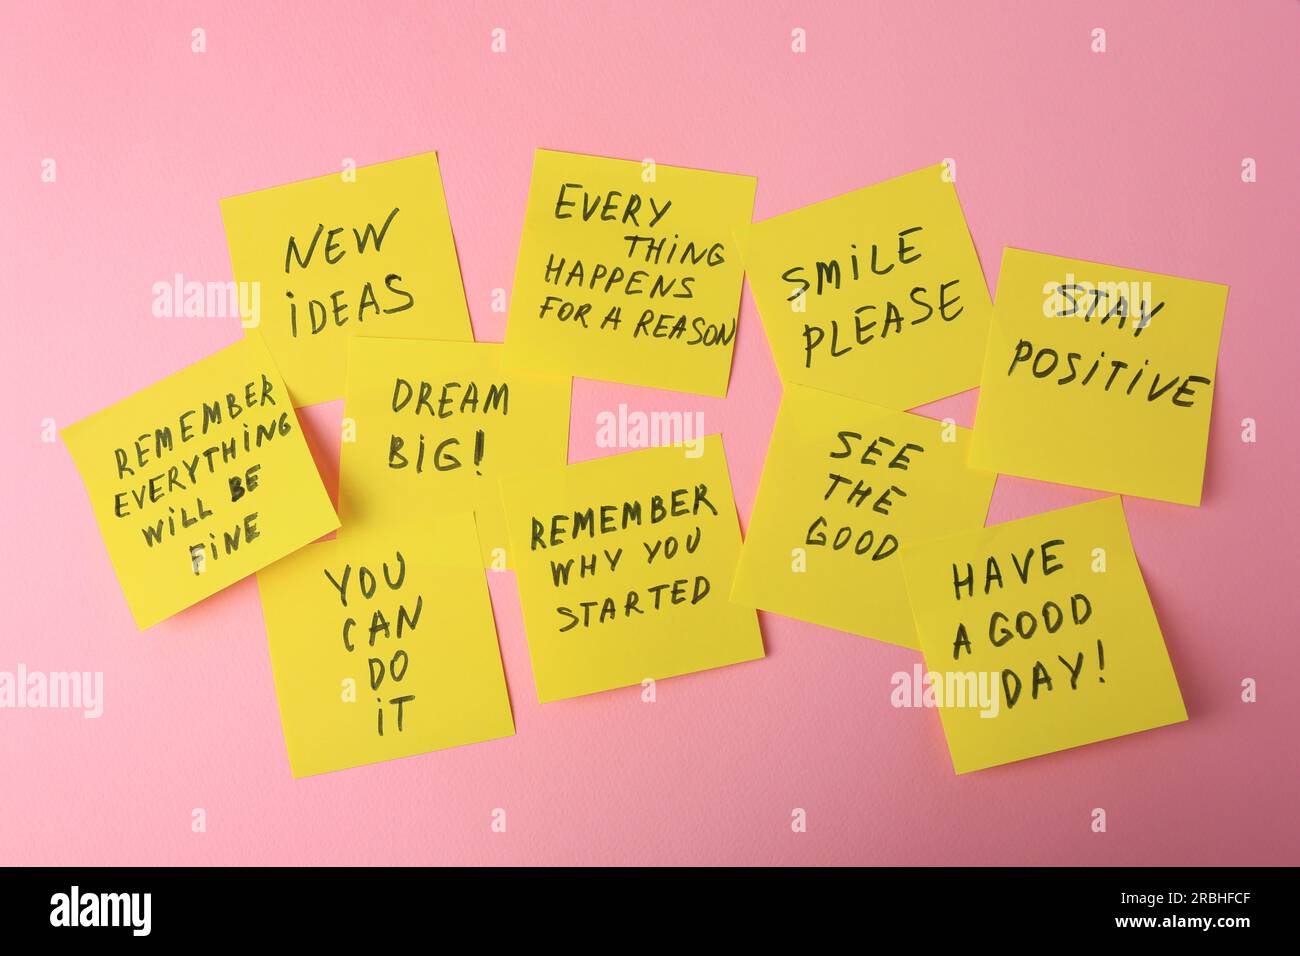 Paper notes with life-affirming phrases on pink background Stock Photo